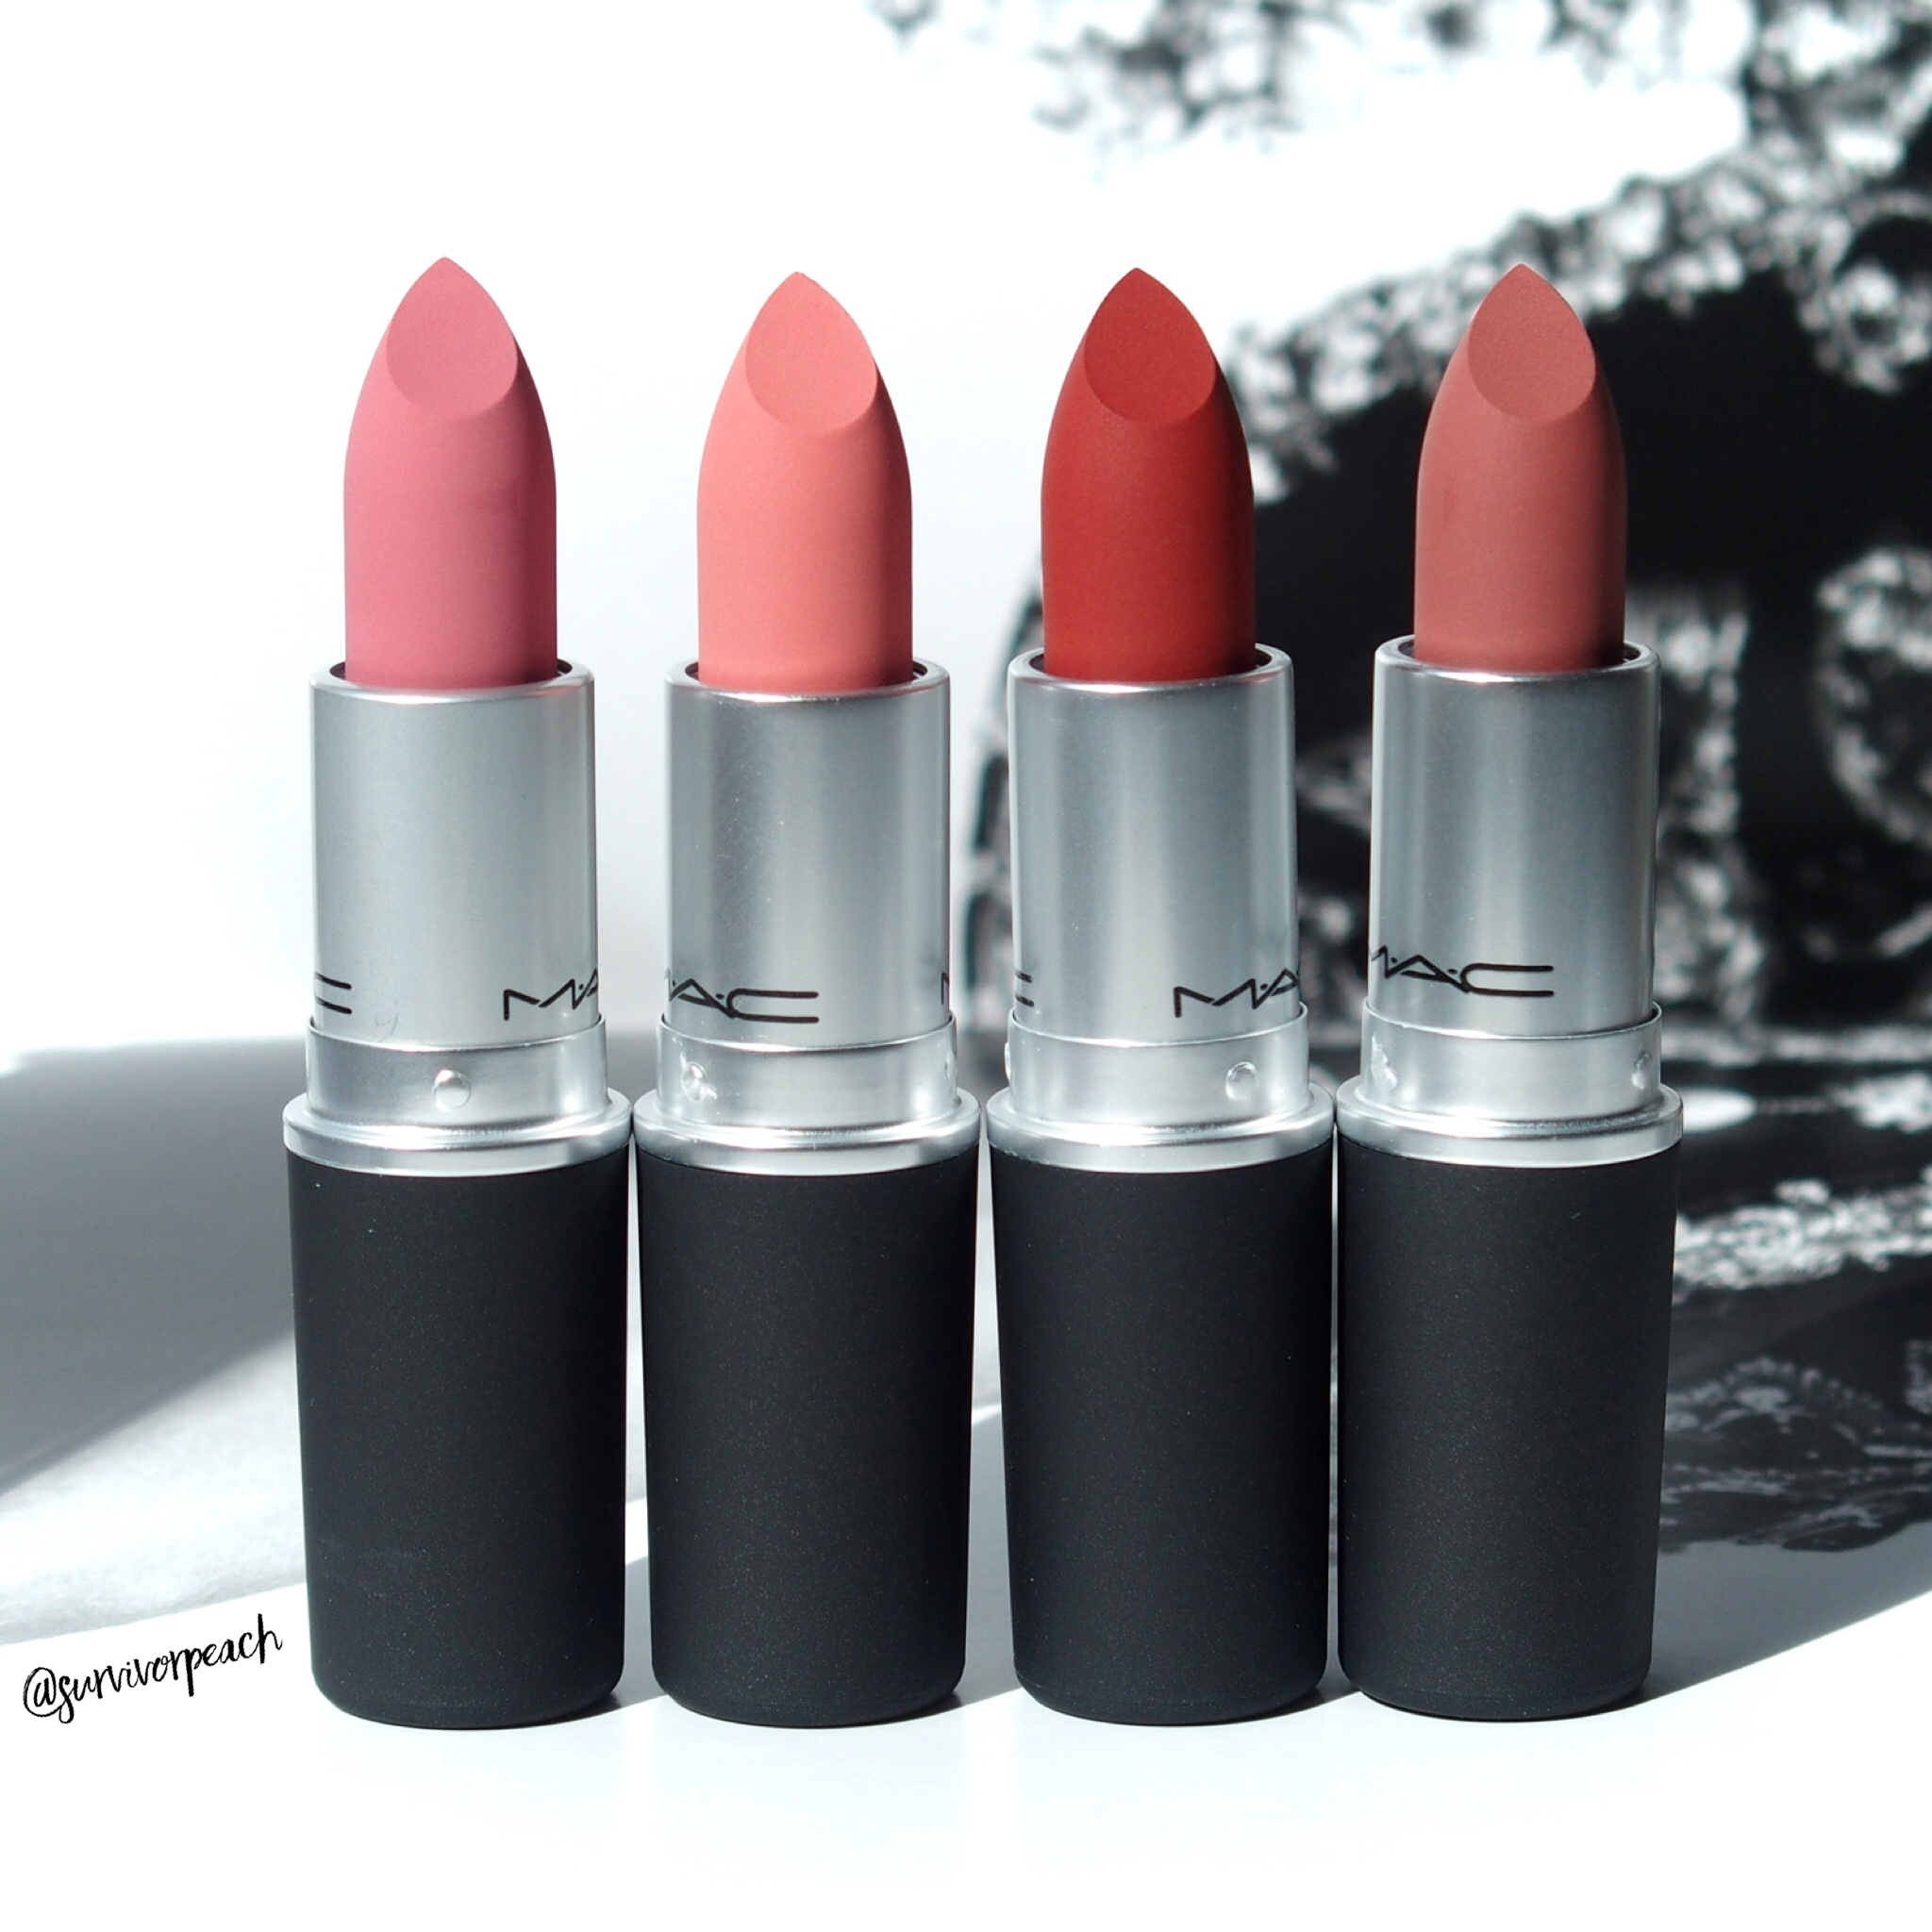 Mac Powder KISS Lipsticks - Scattered Petals, Devoted to Chlli, Sultry Move...